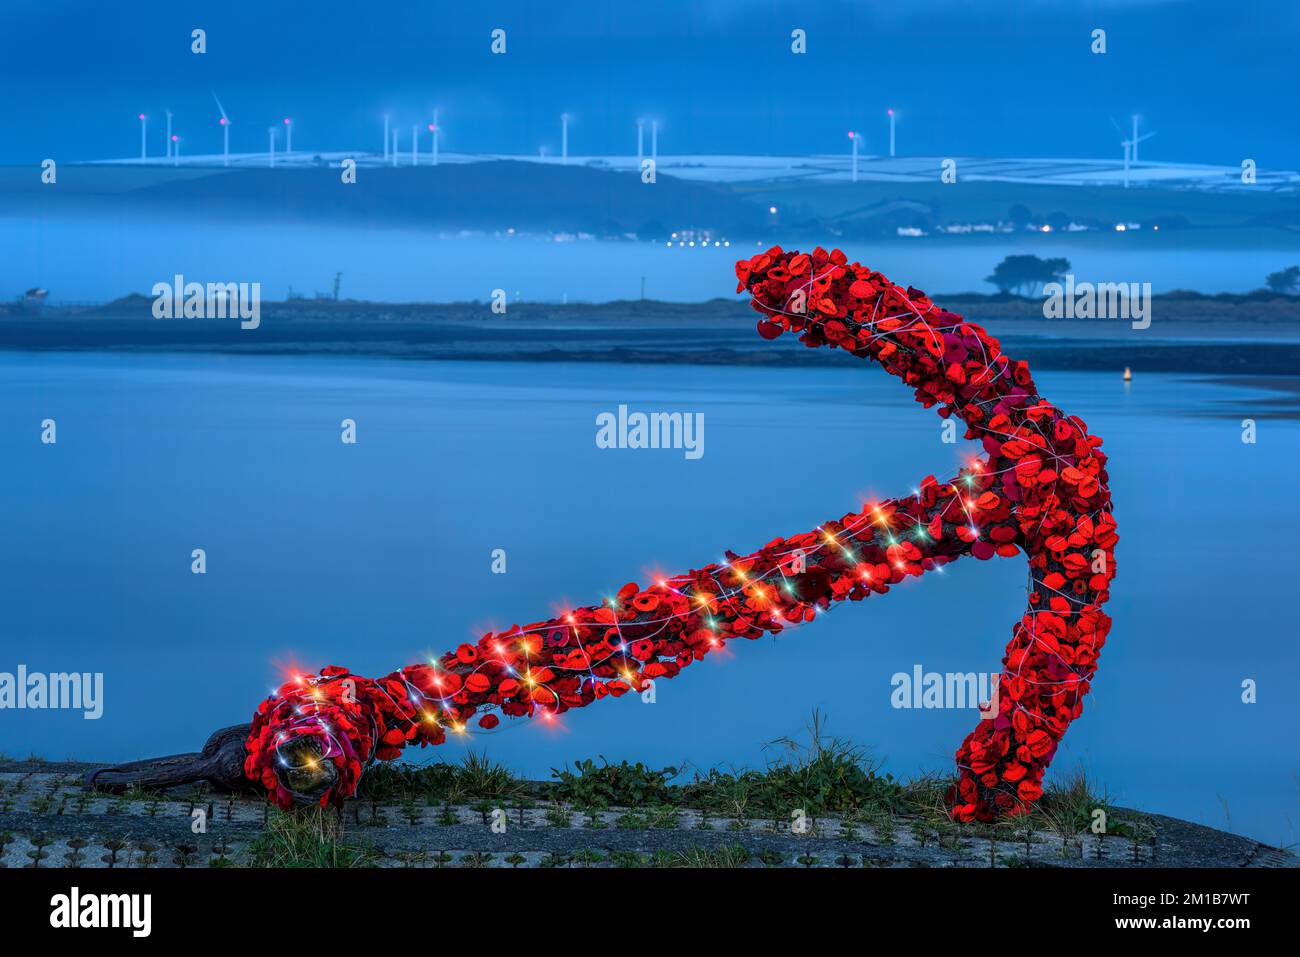 After a day of drifting mist and freezing temperatures in Appledore North Devon, the landmark Anchor on the quay, decorated with crocheted poppies and Stock Photo